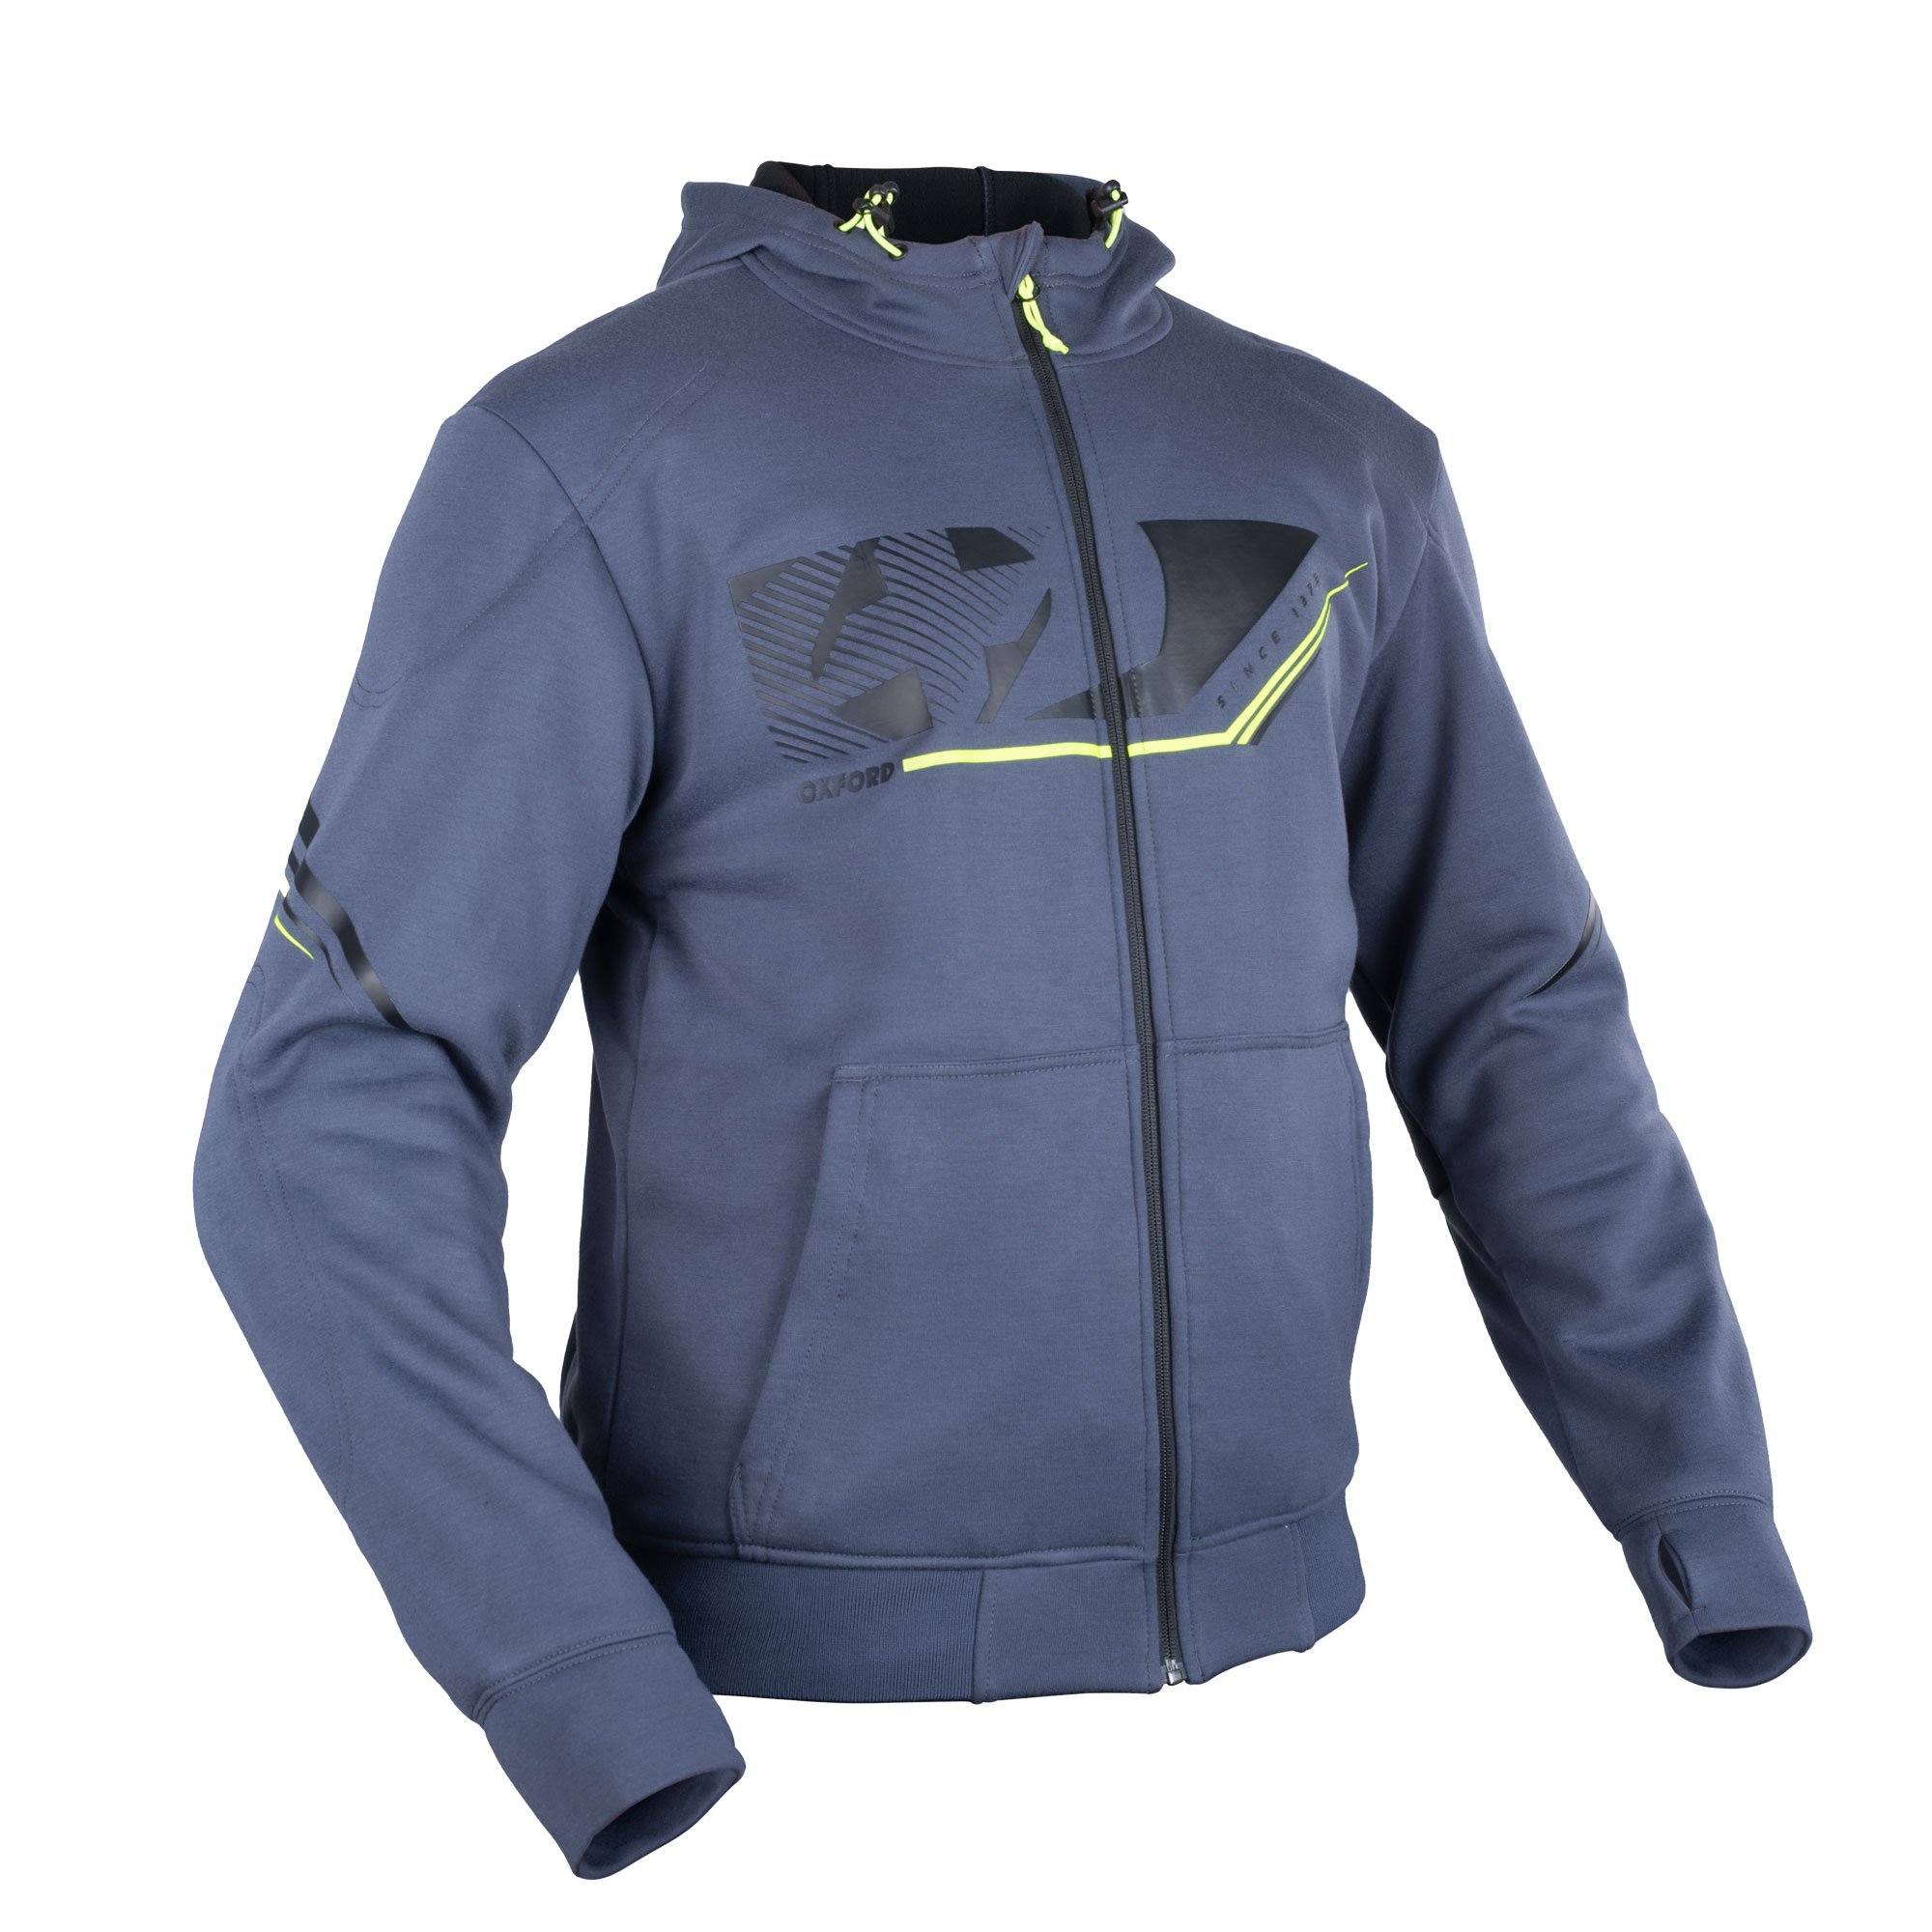 Super Hoodie 2.0 MS Sports Grey : Oxford Products